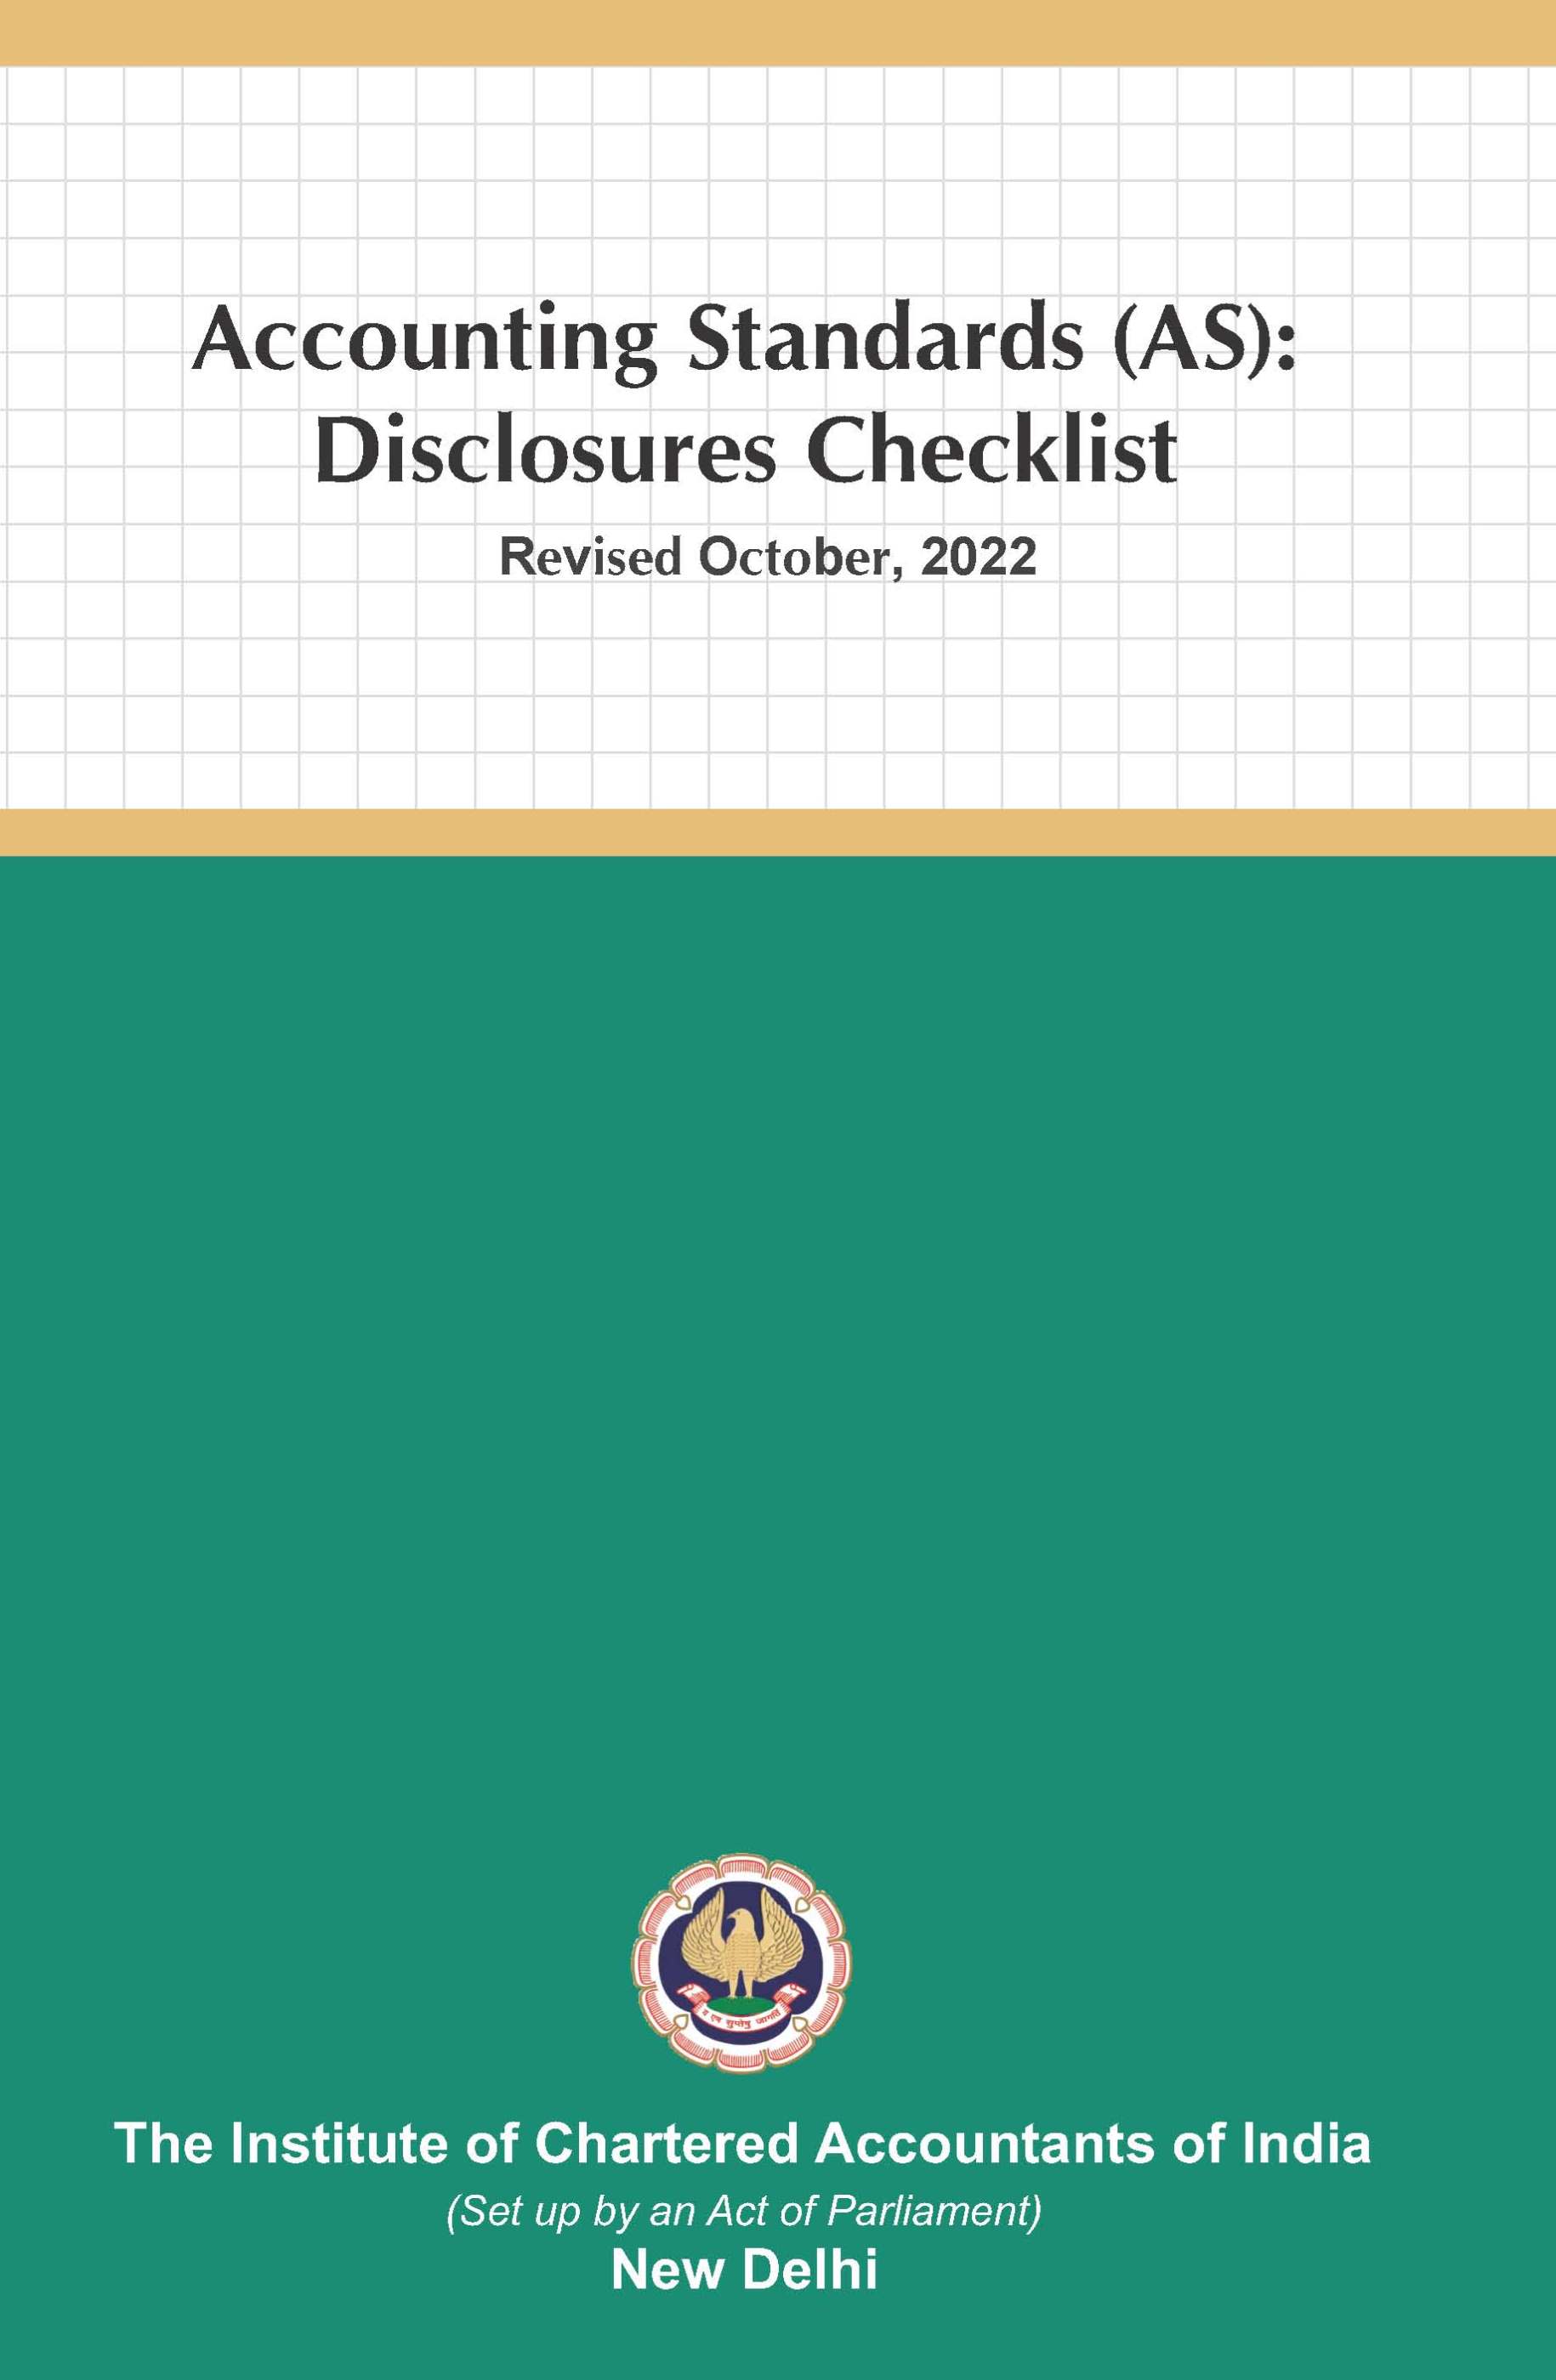 Accounting Standards (AS): Disclosures Checklist (Revised October, 2022)